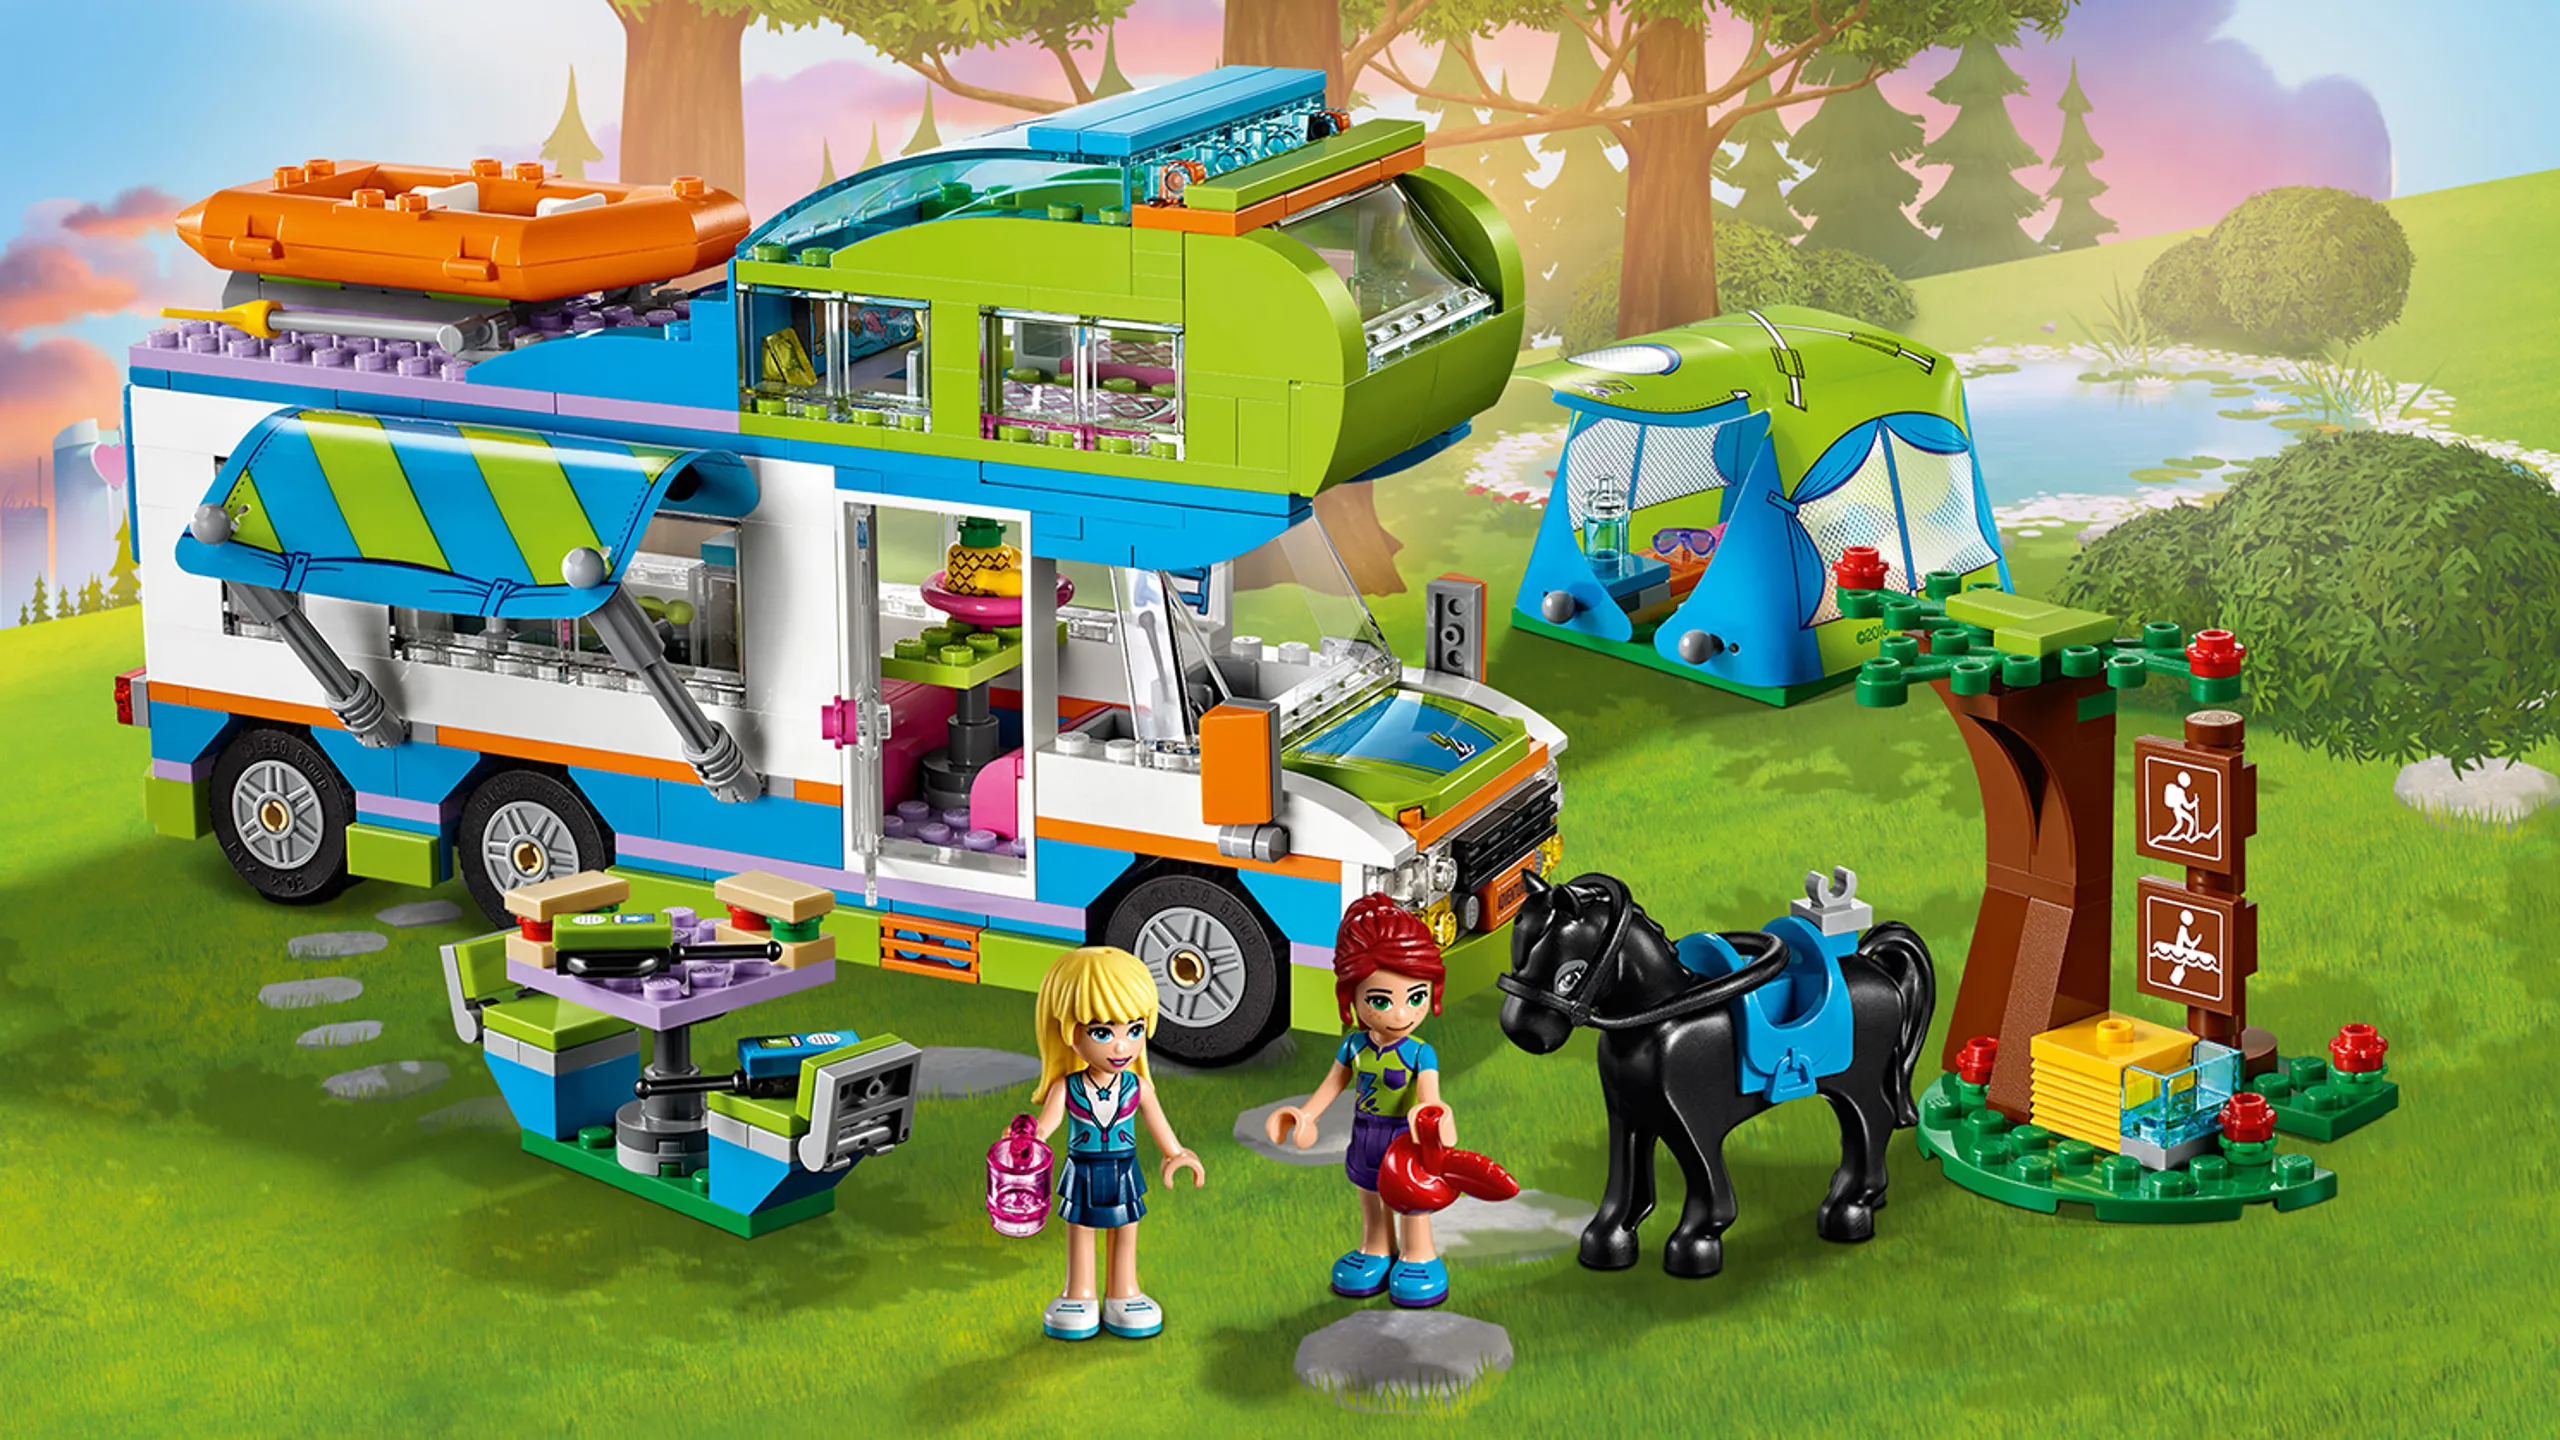 LEGO Friends Mia's Camper Van - 41339 - Drive to the countryside in the Camper Van with Mia and Stephanie for a camping adventure. Set up the canopy and picnic bench, then get to work in the kitchen preparing a meal to enjoy outside. Plan adventures in the inflatable dinghy or take the friendly horse for a ride. Pitch the tent and camp out under the stars.